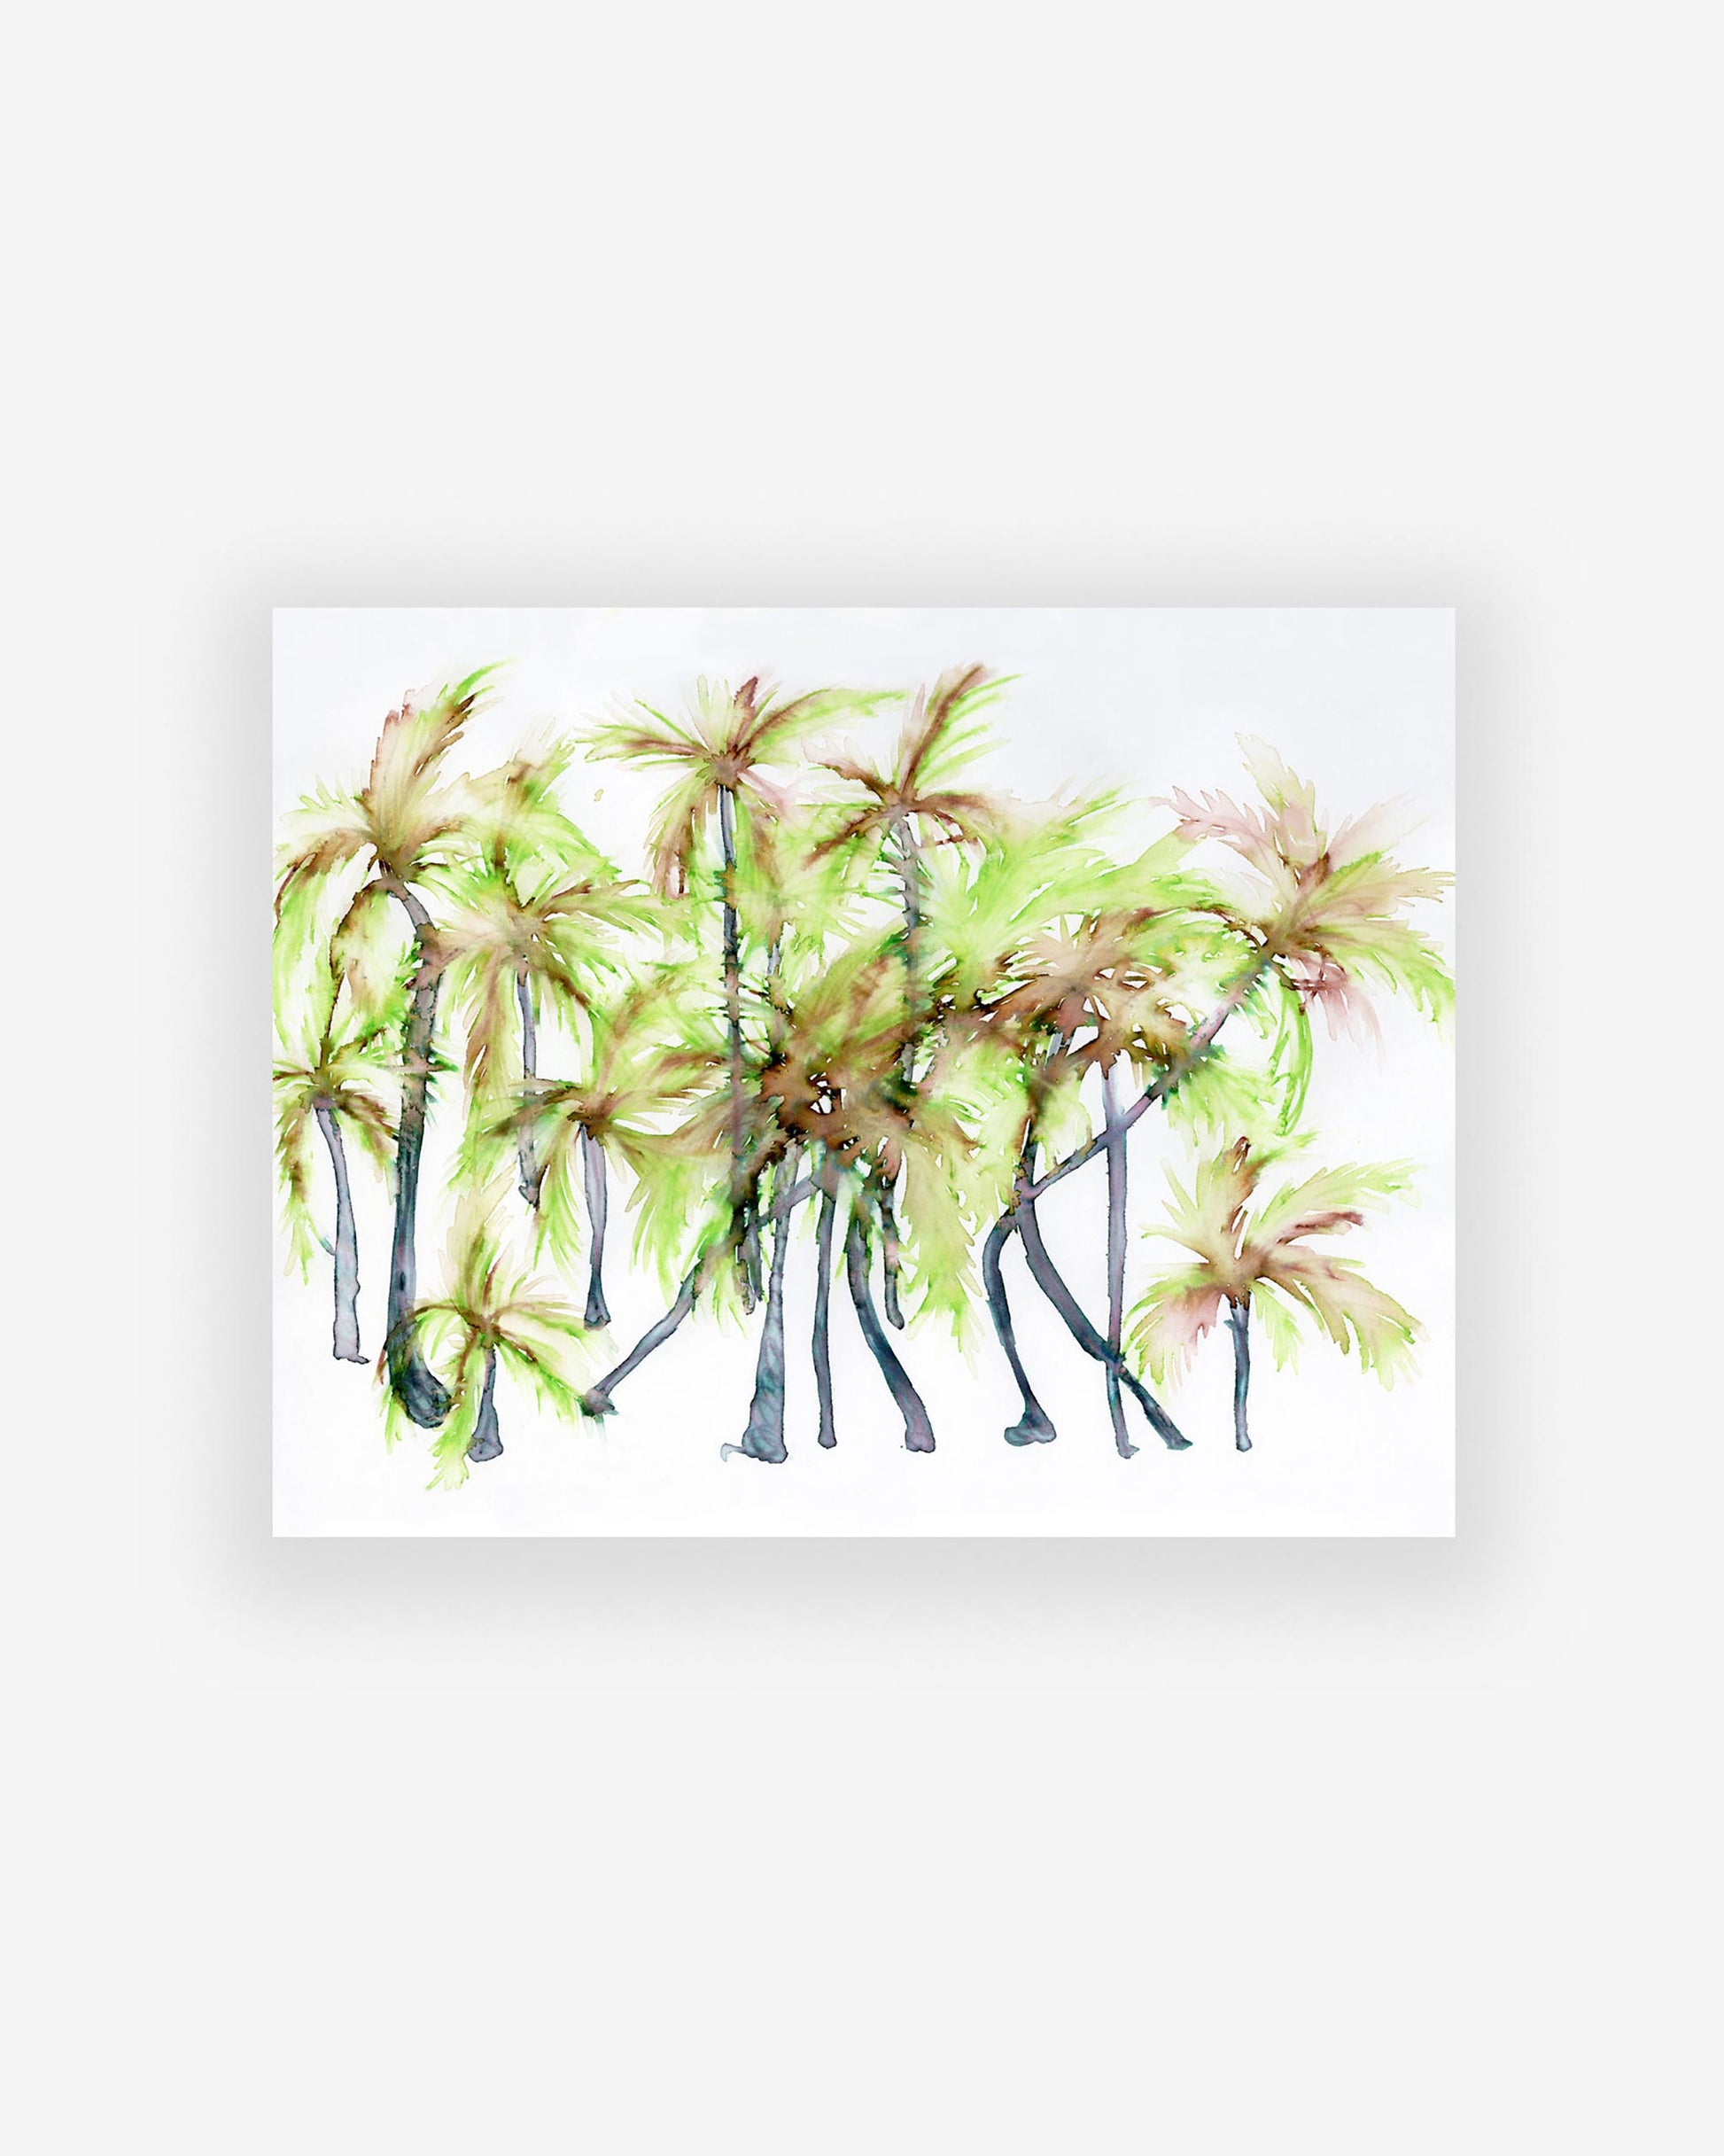 A Hermosa Print of palm trees on a white background, created by Shanan Campanaro